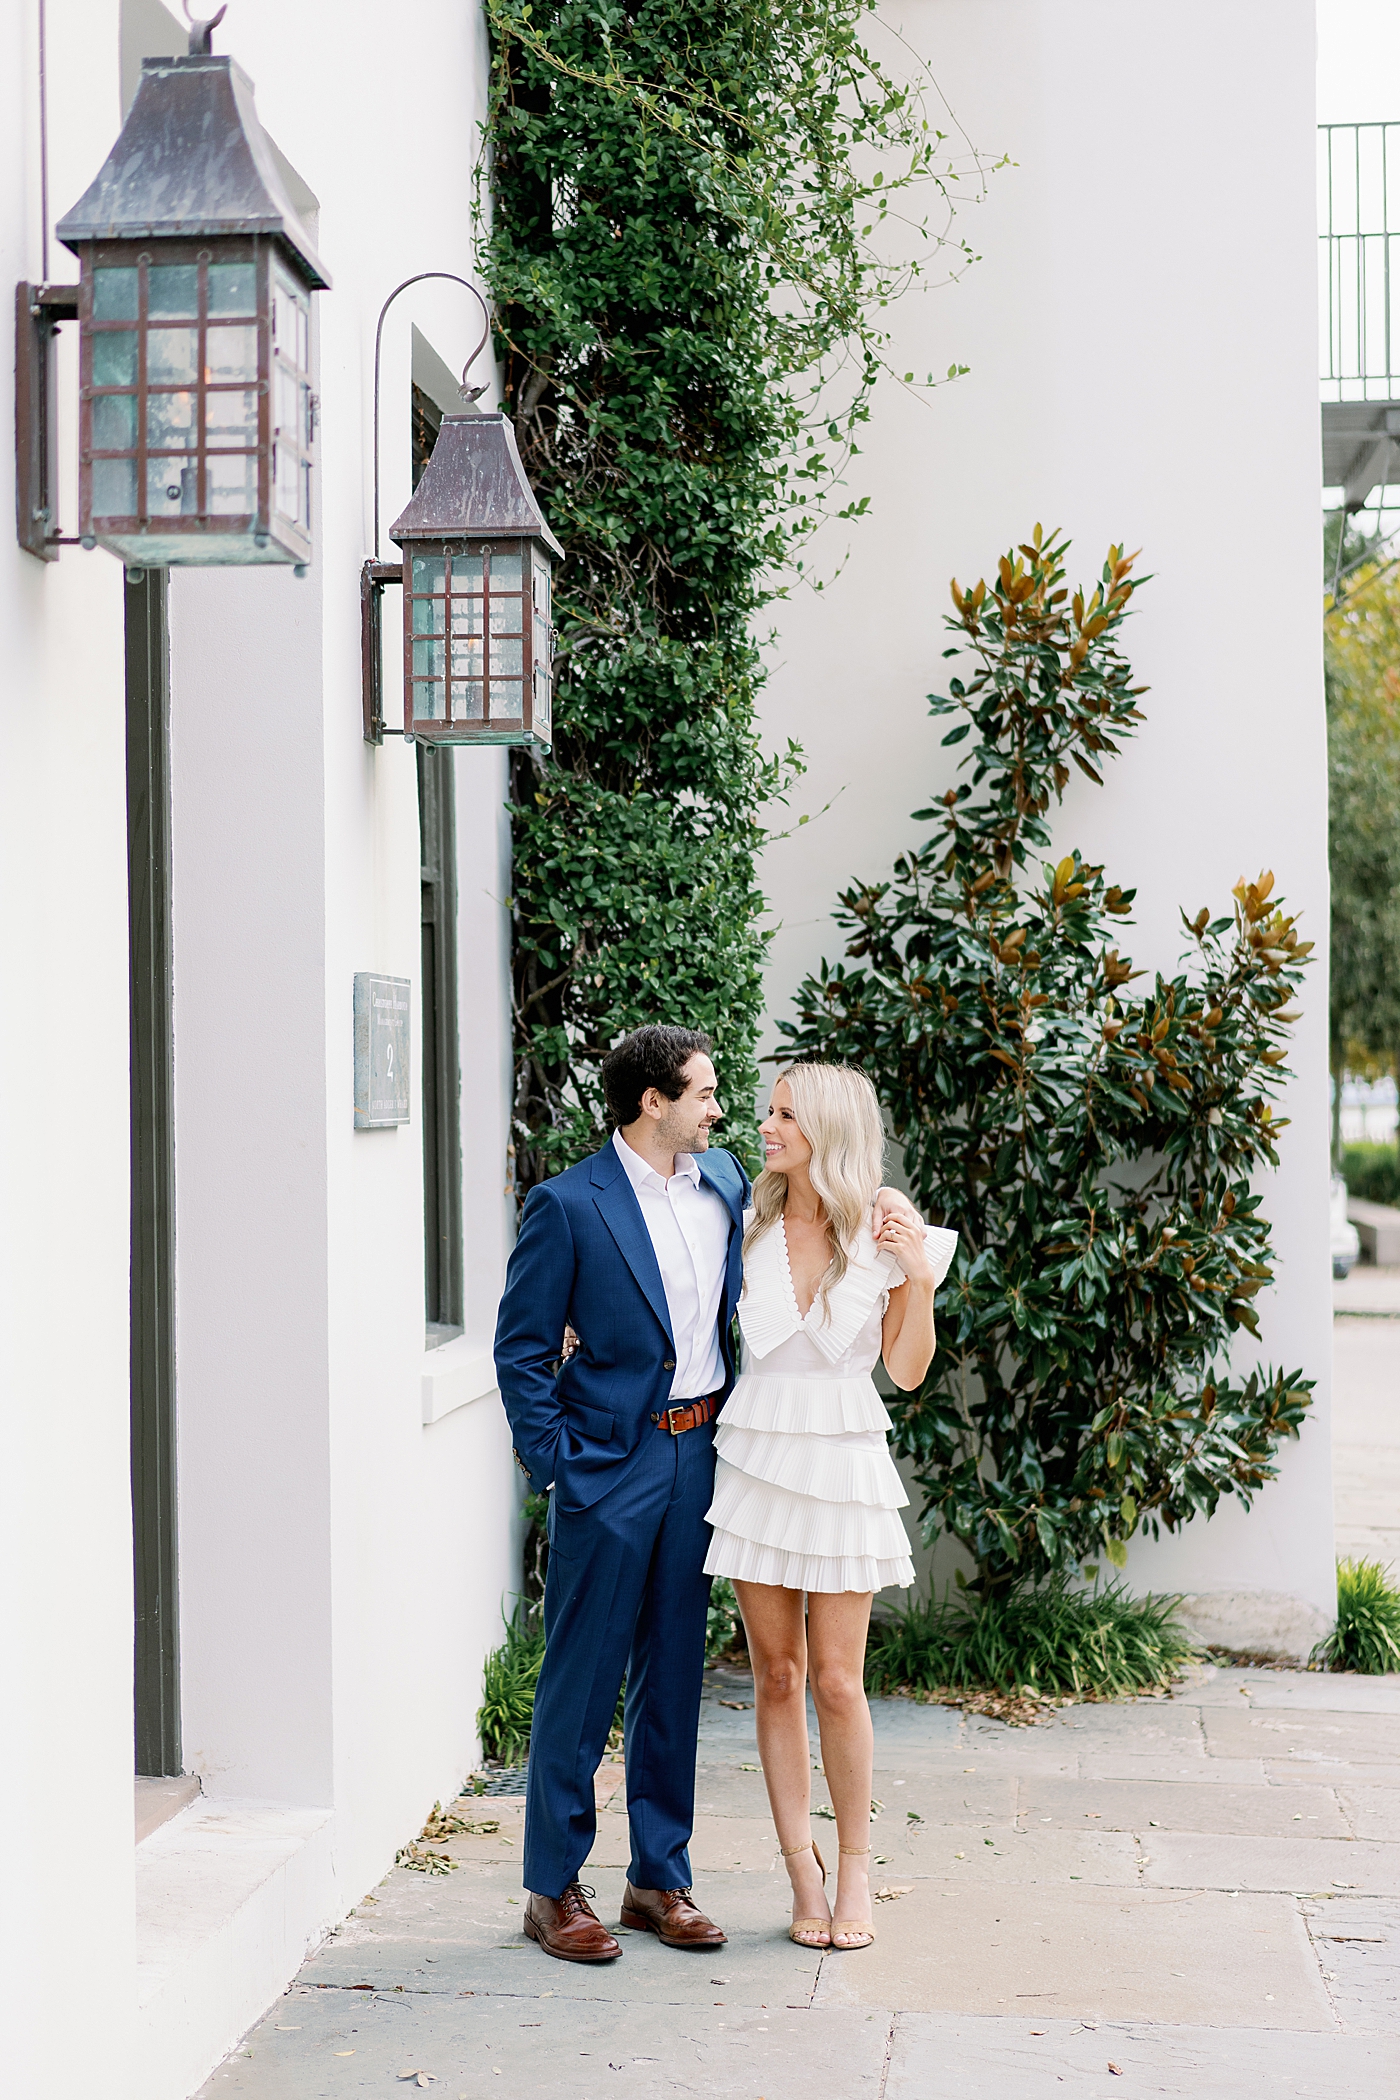 Couple posing in front of white building | Image by Annie Laura Photo